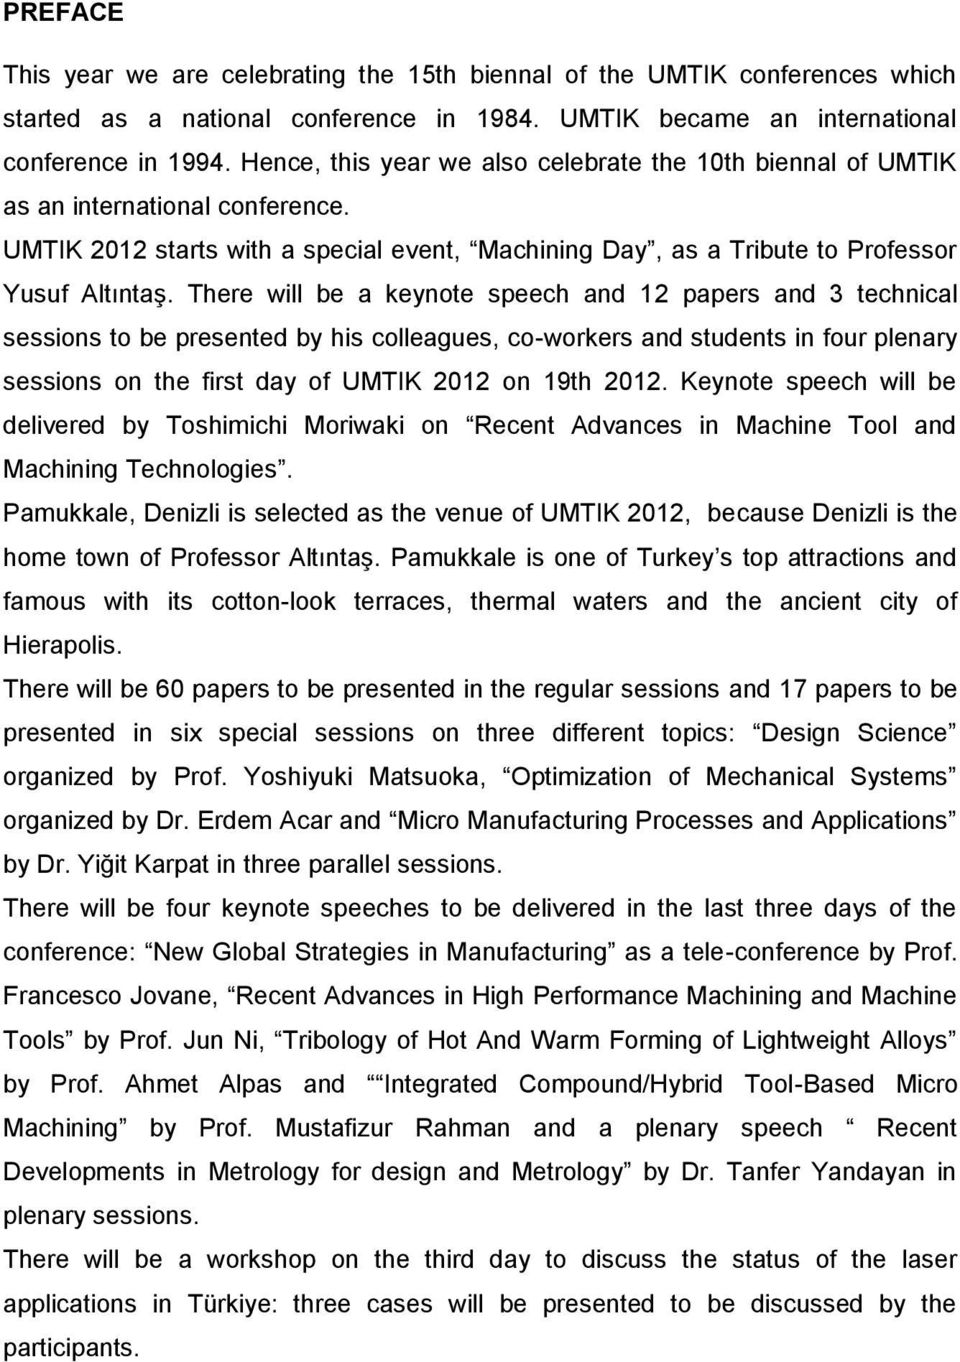 There will be a keynote speech and 12 papers and 3 technical sessions to be presented by his colleagues, co-workers and students in four plenary sessions on the first day of UMTIK 2012 on 19th 2012.